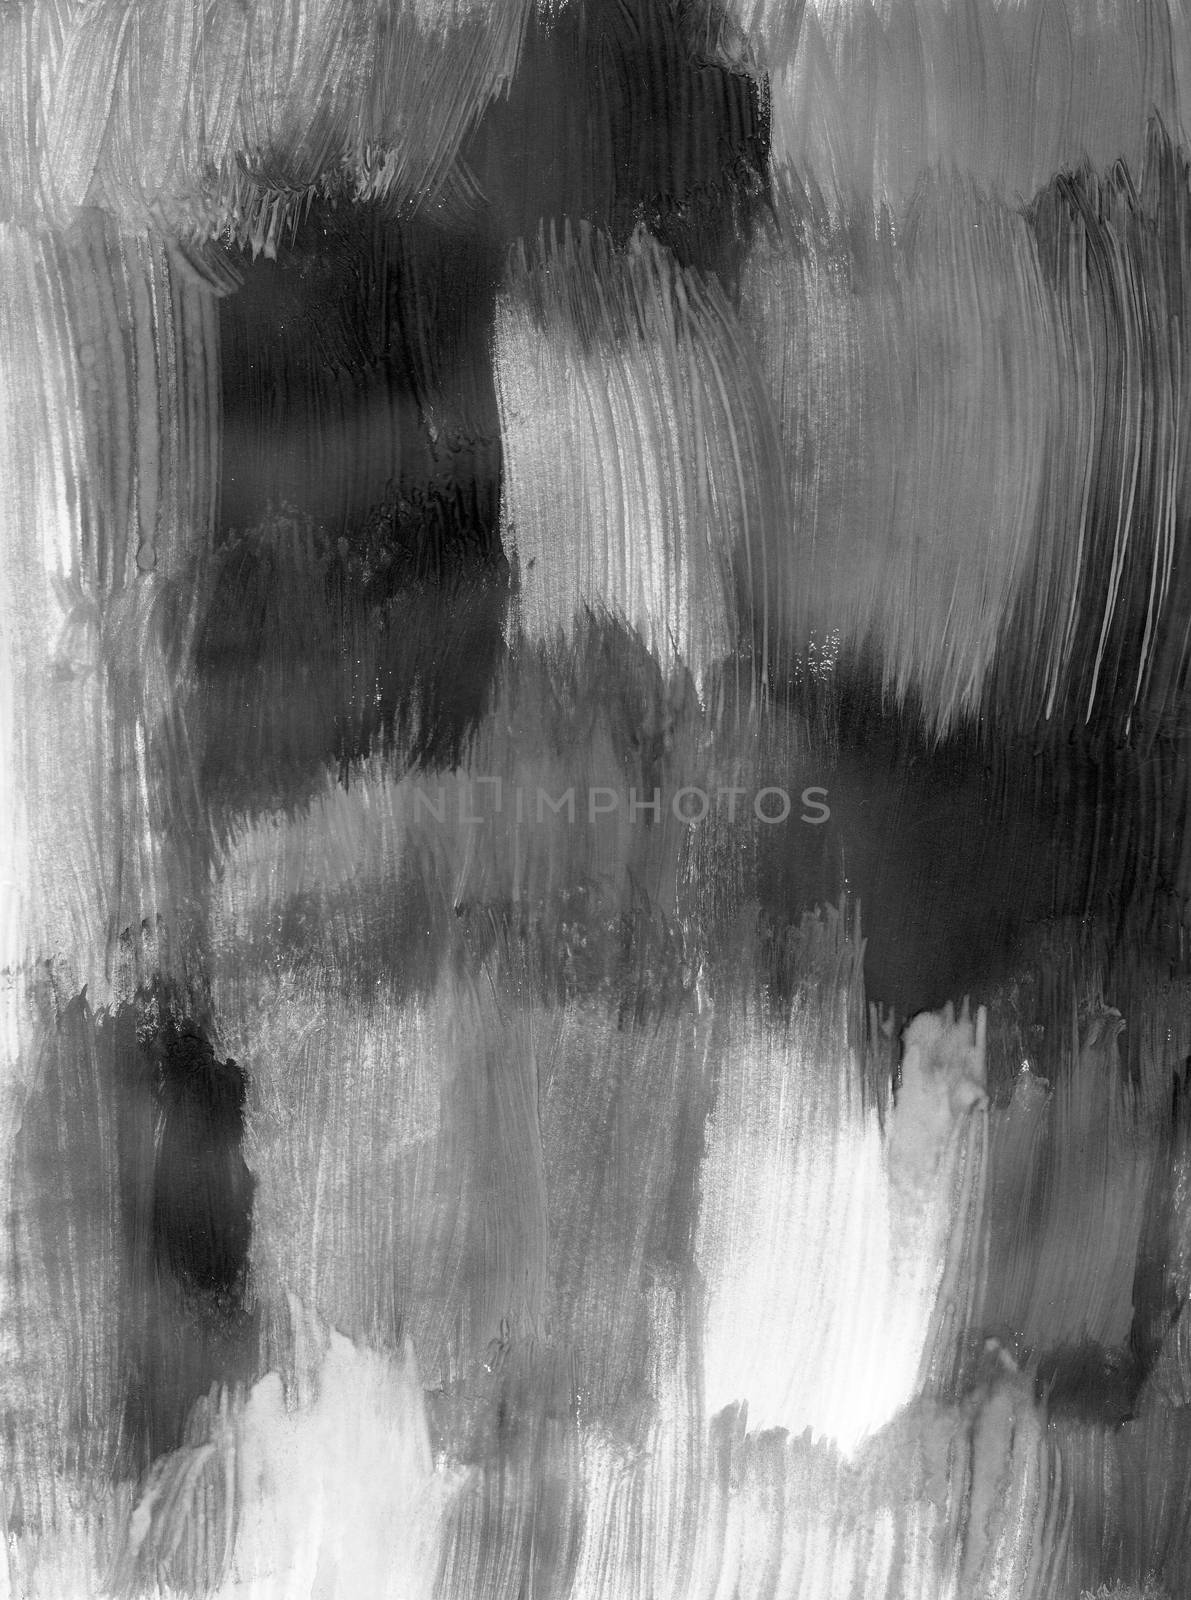 Abstract handdrawn painting, trendy art texture. Modern artwork. Strokes of paint, messy splashes. Contemporary art. Abstract pattern. Unique Texture backdrop painting mix form. Creative natural chaos structure element material creation.